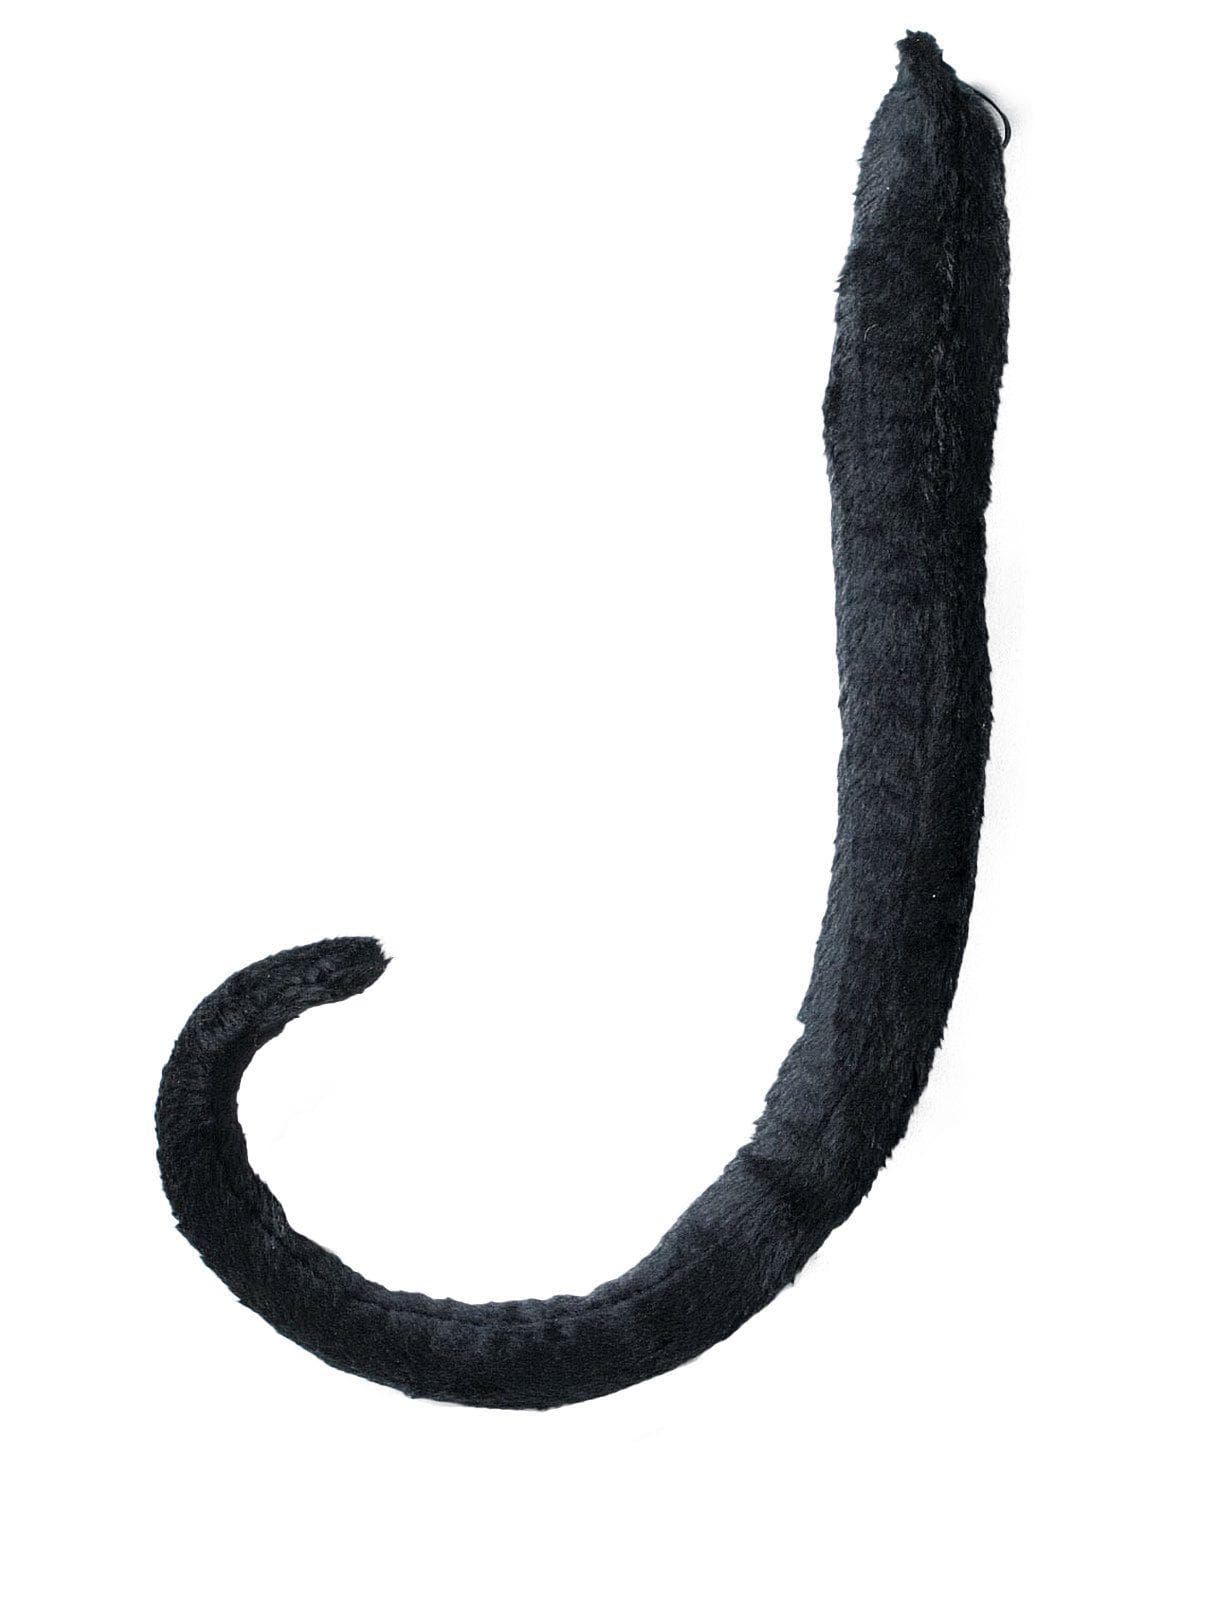 Adult Black Plush Long Tail - Deluxe - costumes.com